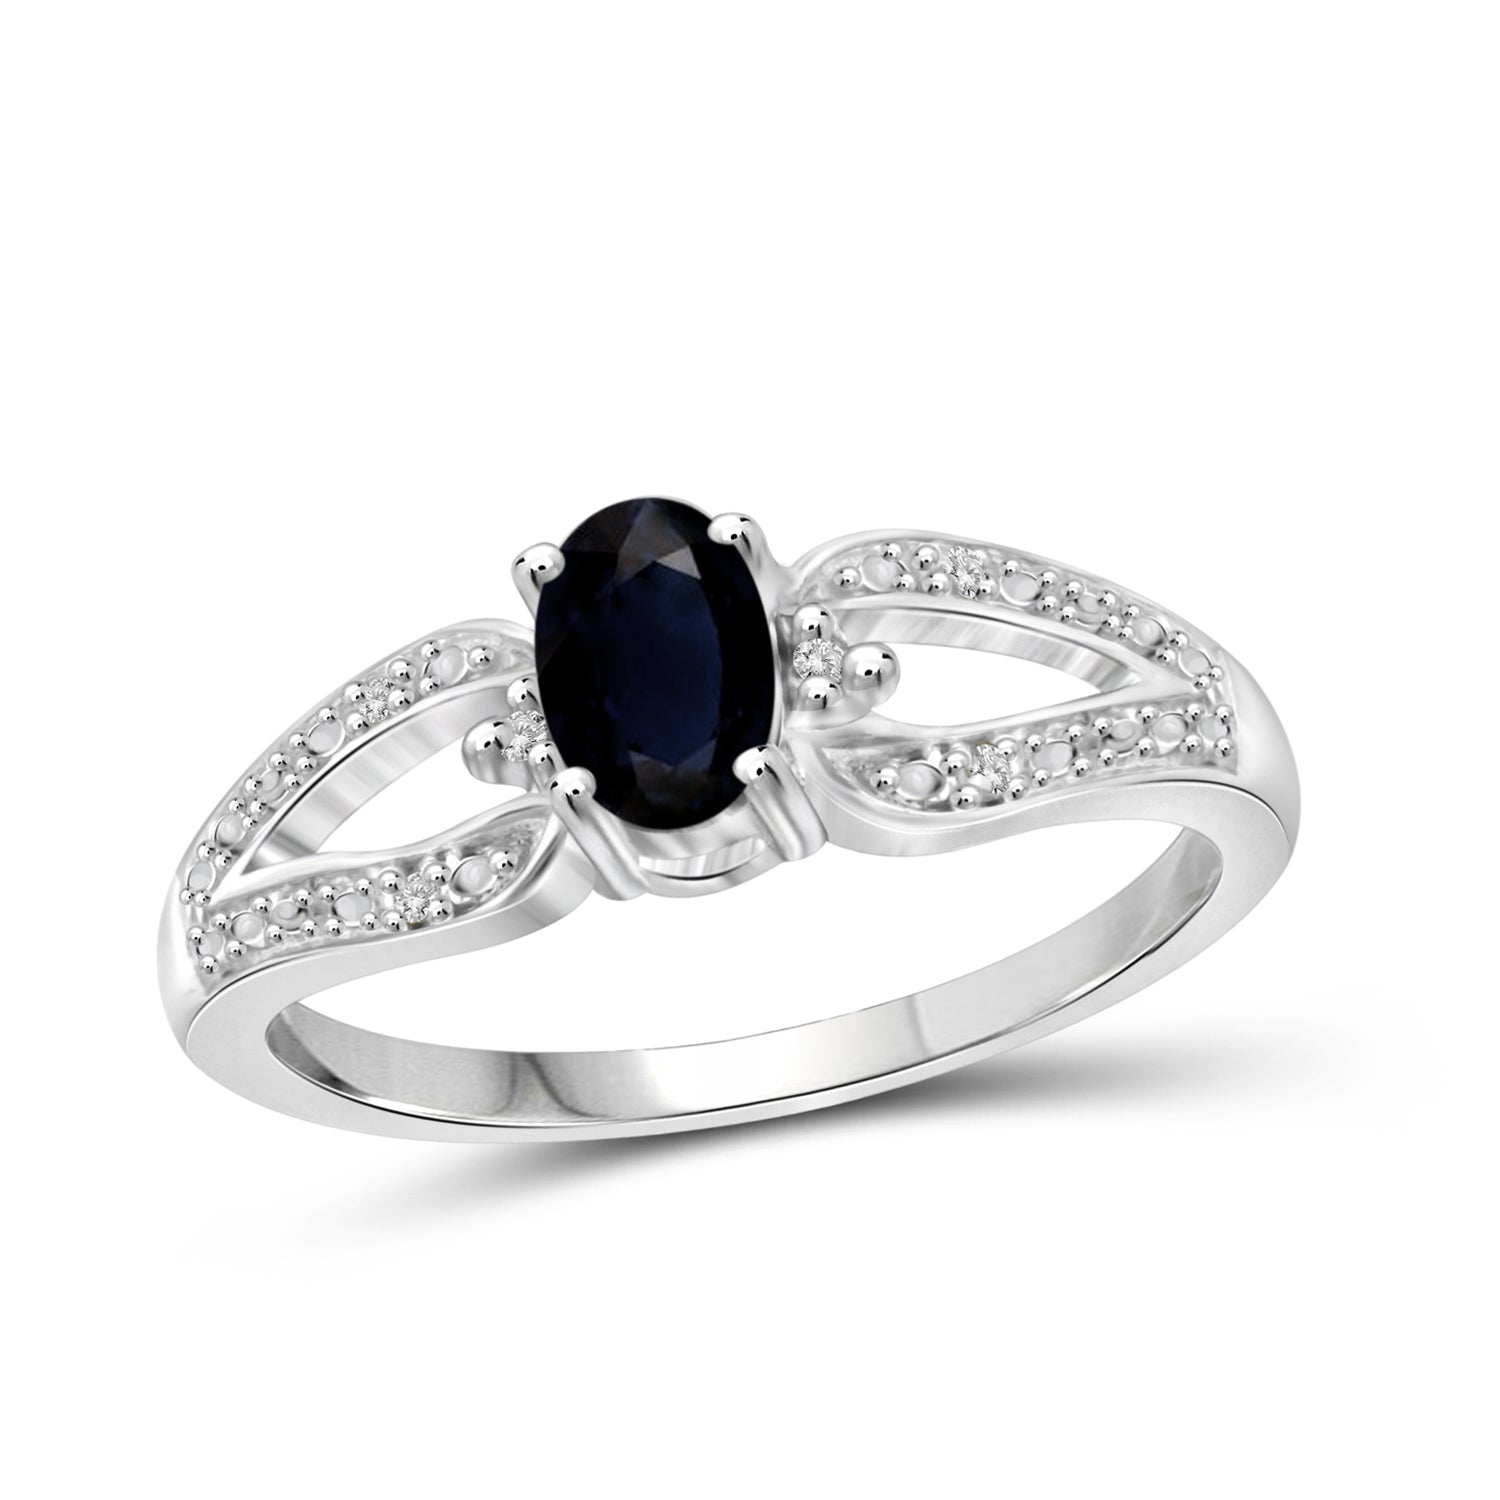 1/2 Carat T.G.W. Sapphire And White Diamond Accent Sterling Silver Ring